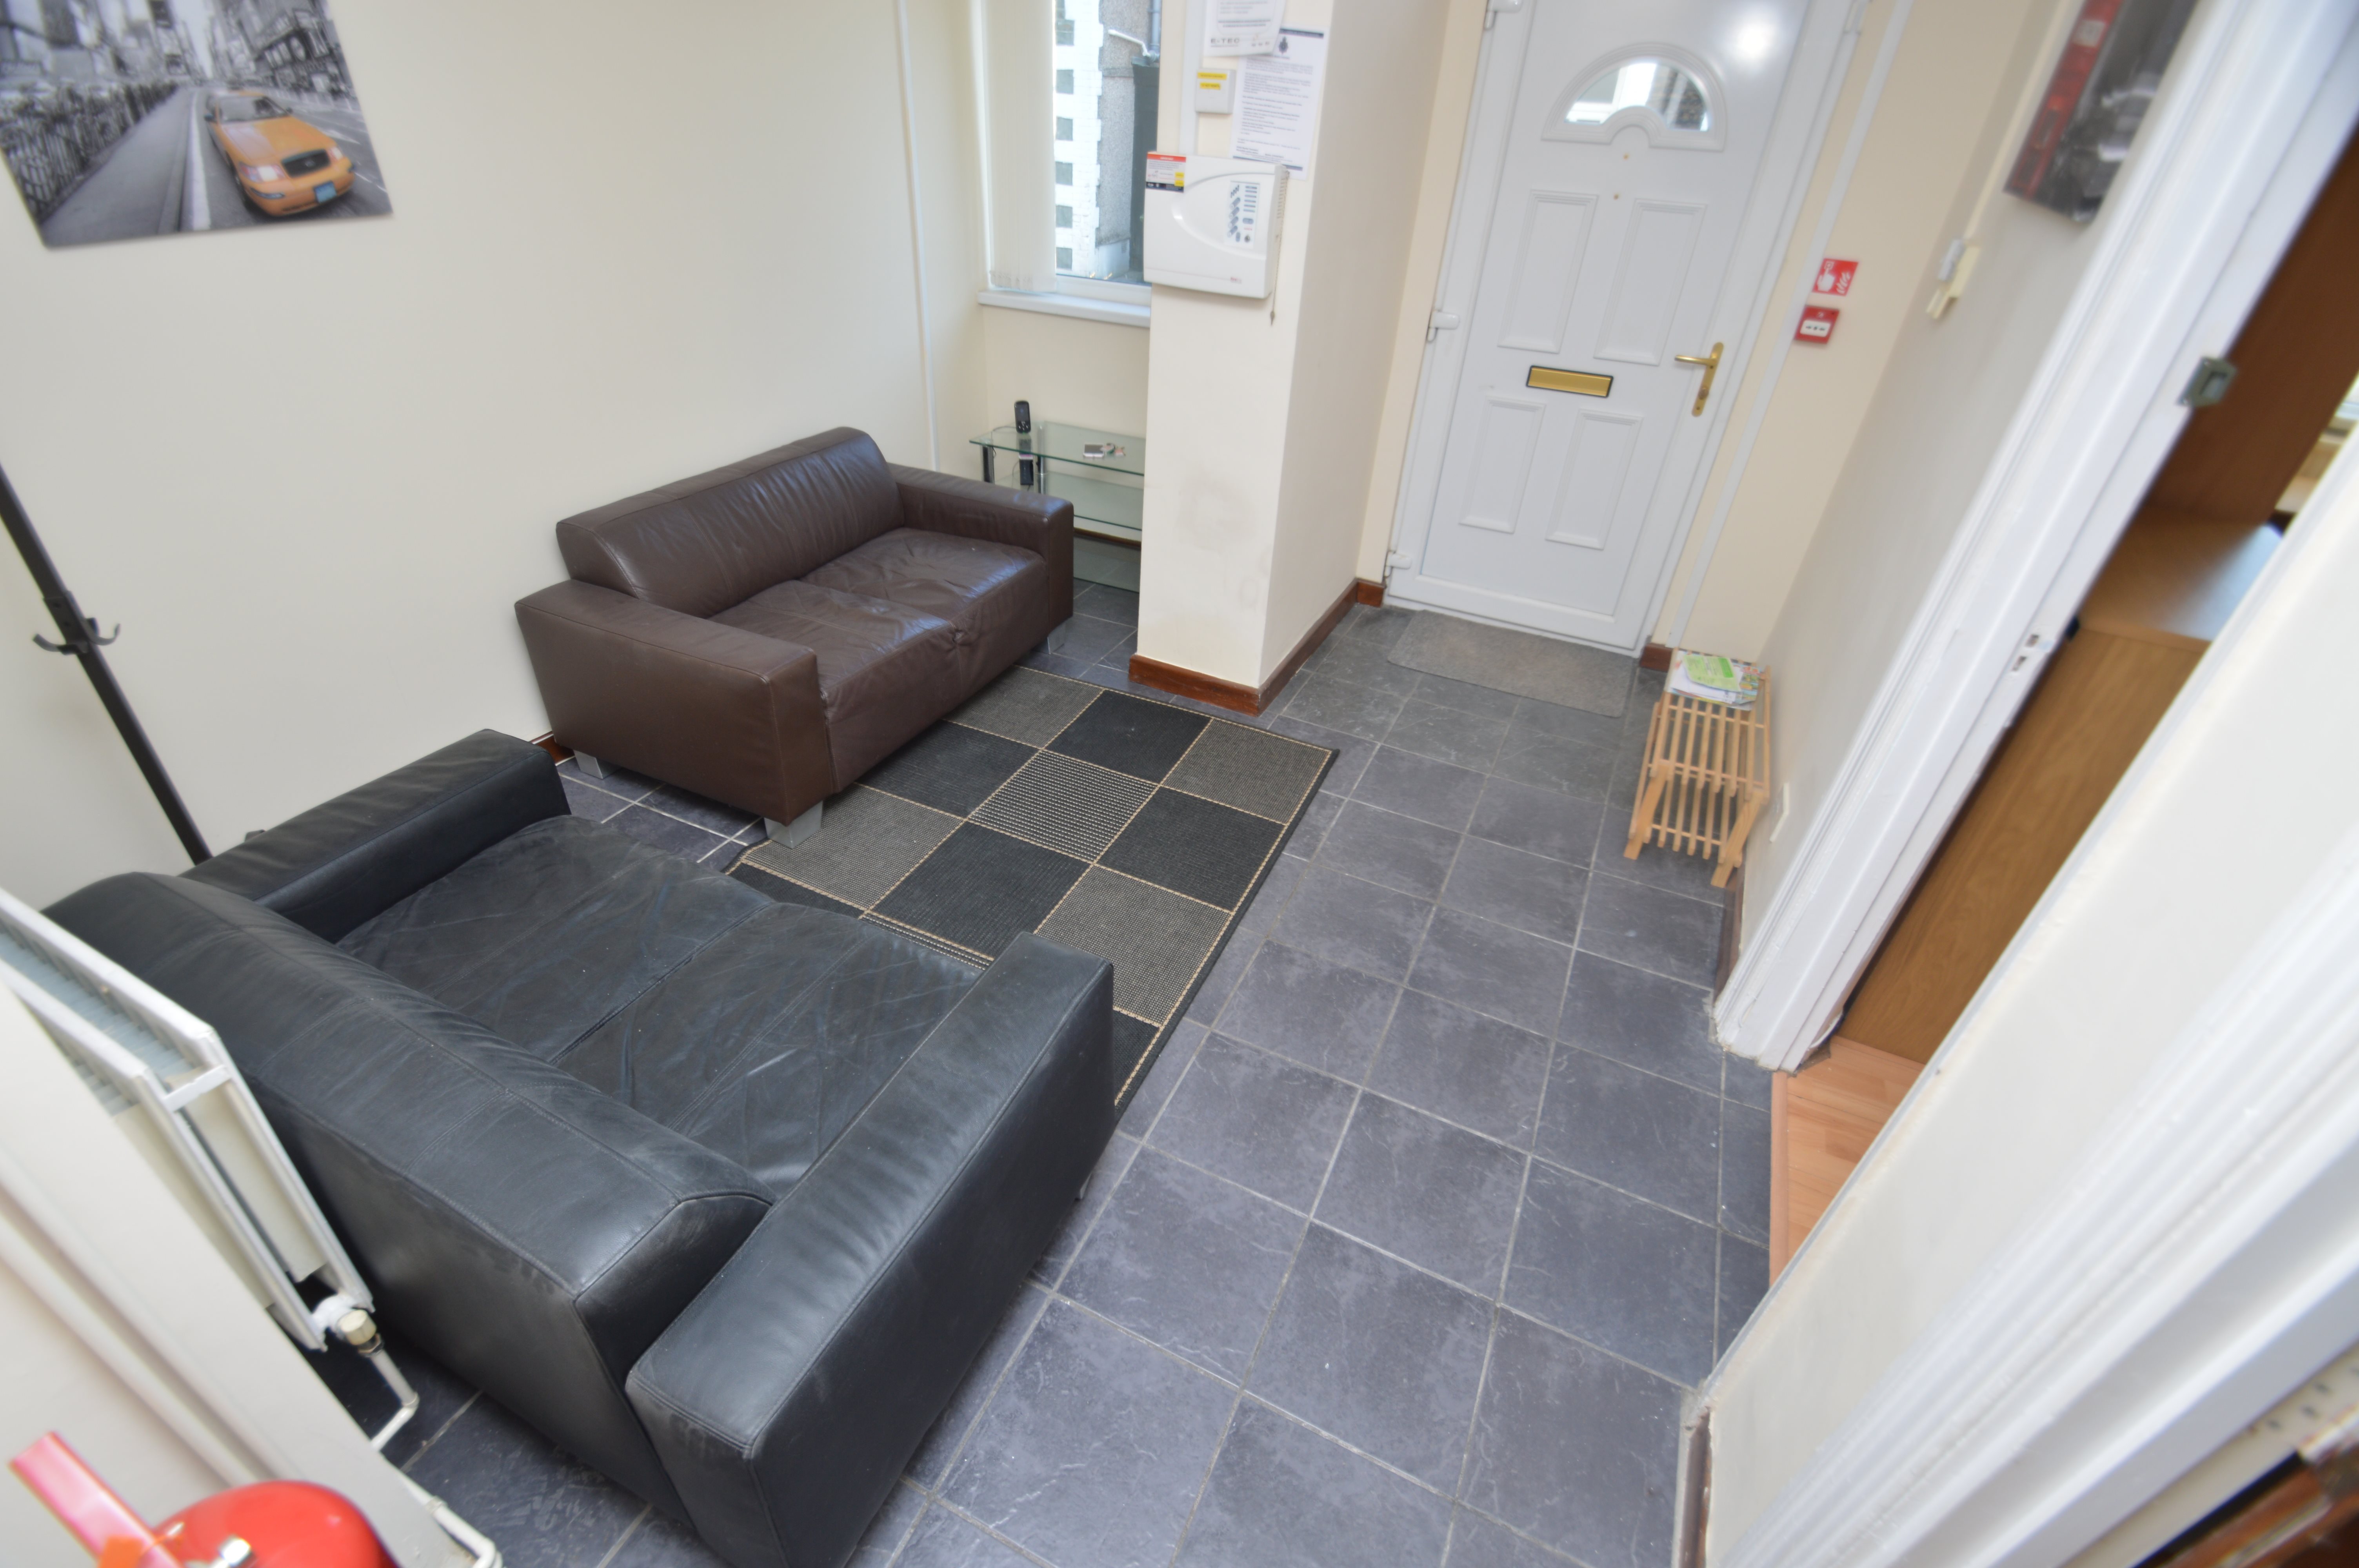 1 bed house / flat share to rent in Wood Road, Treforest  - Property Image 2